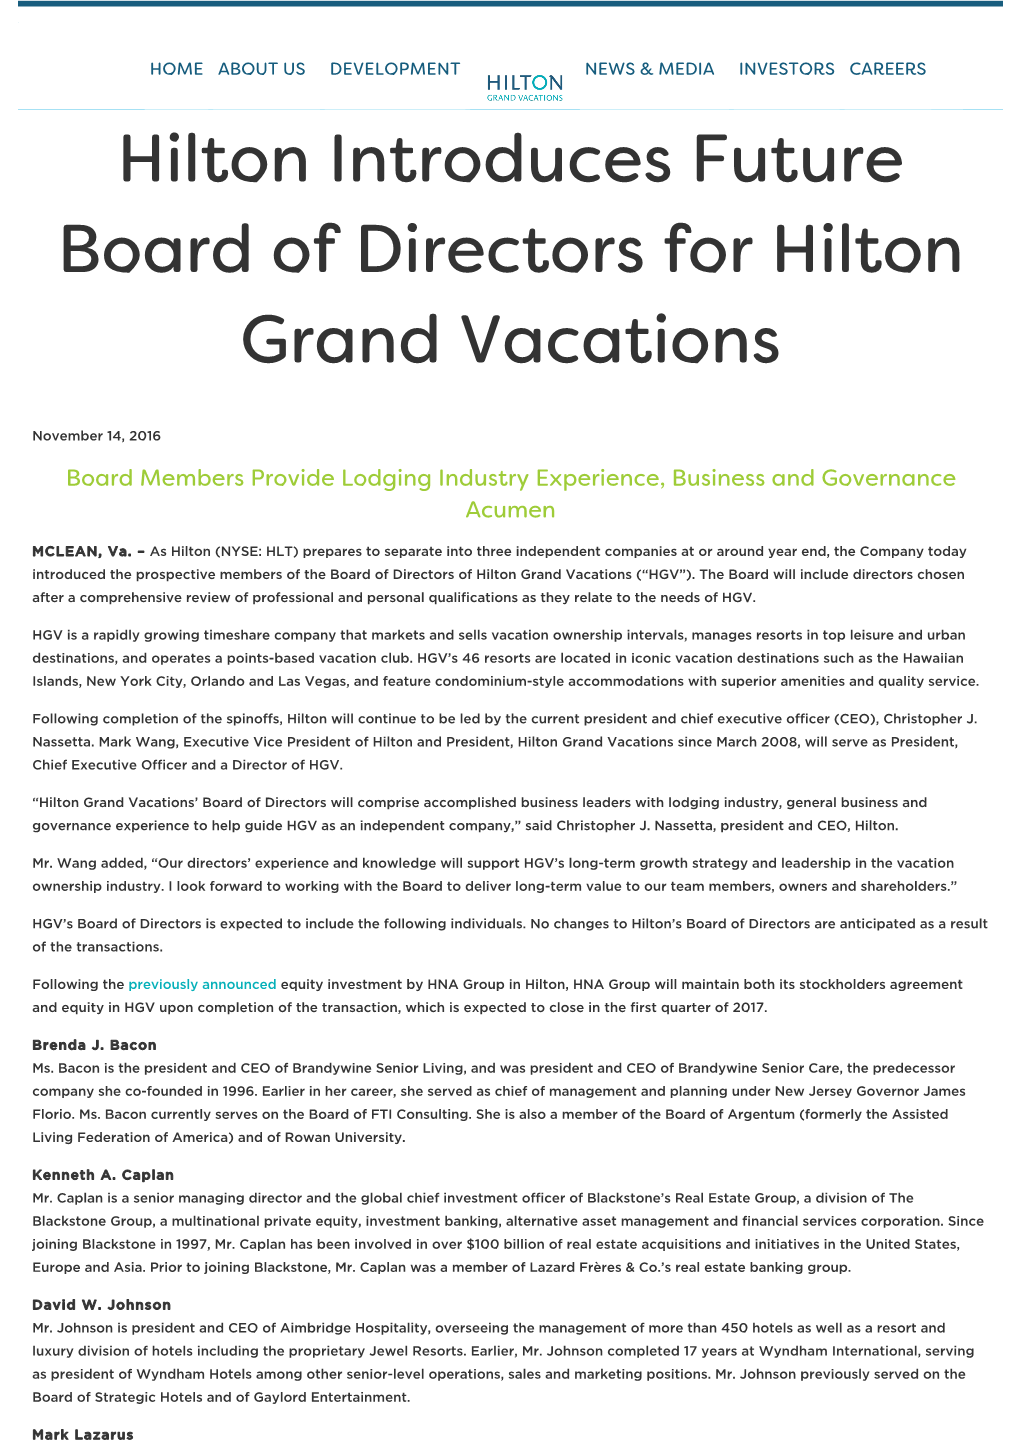 Hilton Introduces Future Board of Directors for Hilton Grand Vacations